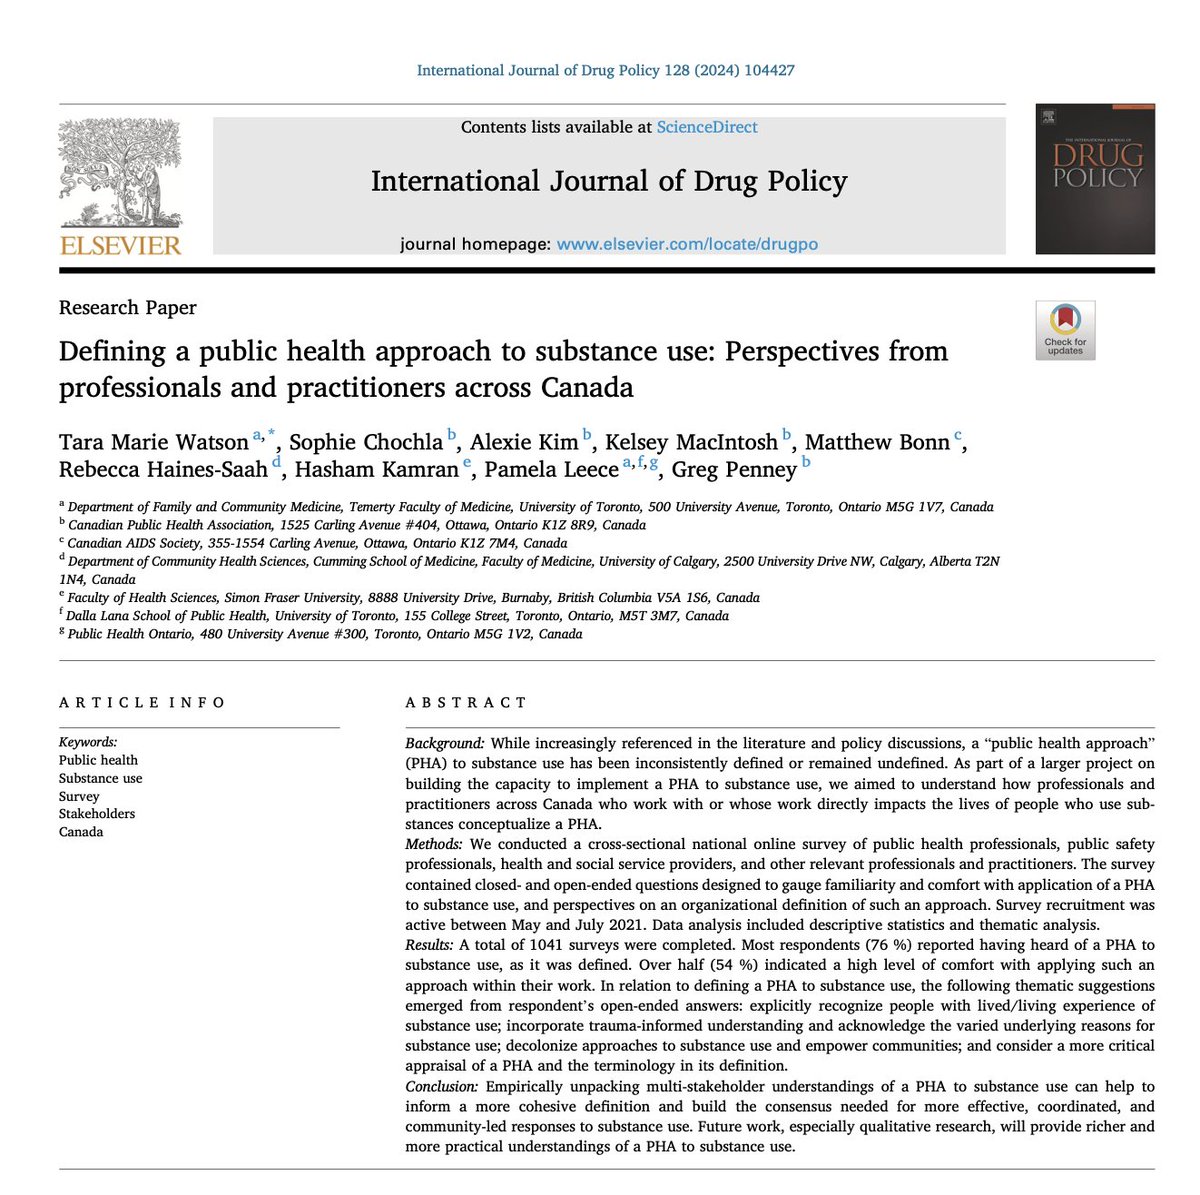 'Defining a public health approach to substance use: Perspectives from professionals and practitioners across Canada' by Dr. Tara Marie Watson et al (2024) via @ijdrugpolicy...how does your region define a public health approach to substance use? Link: sciencedirect.com/science/articl…